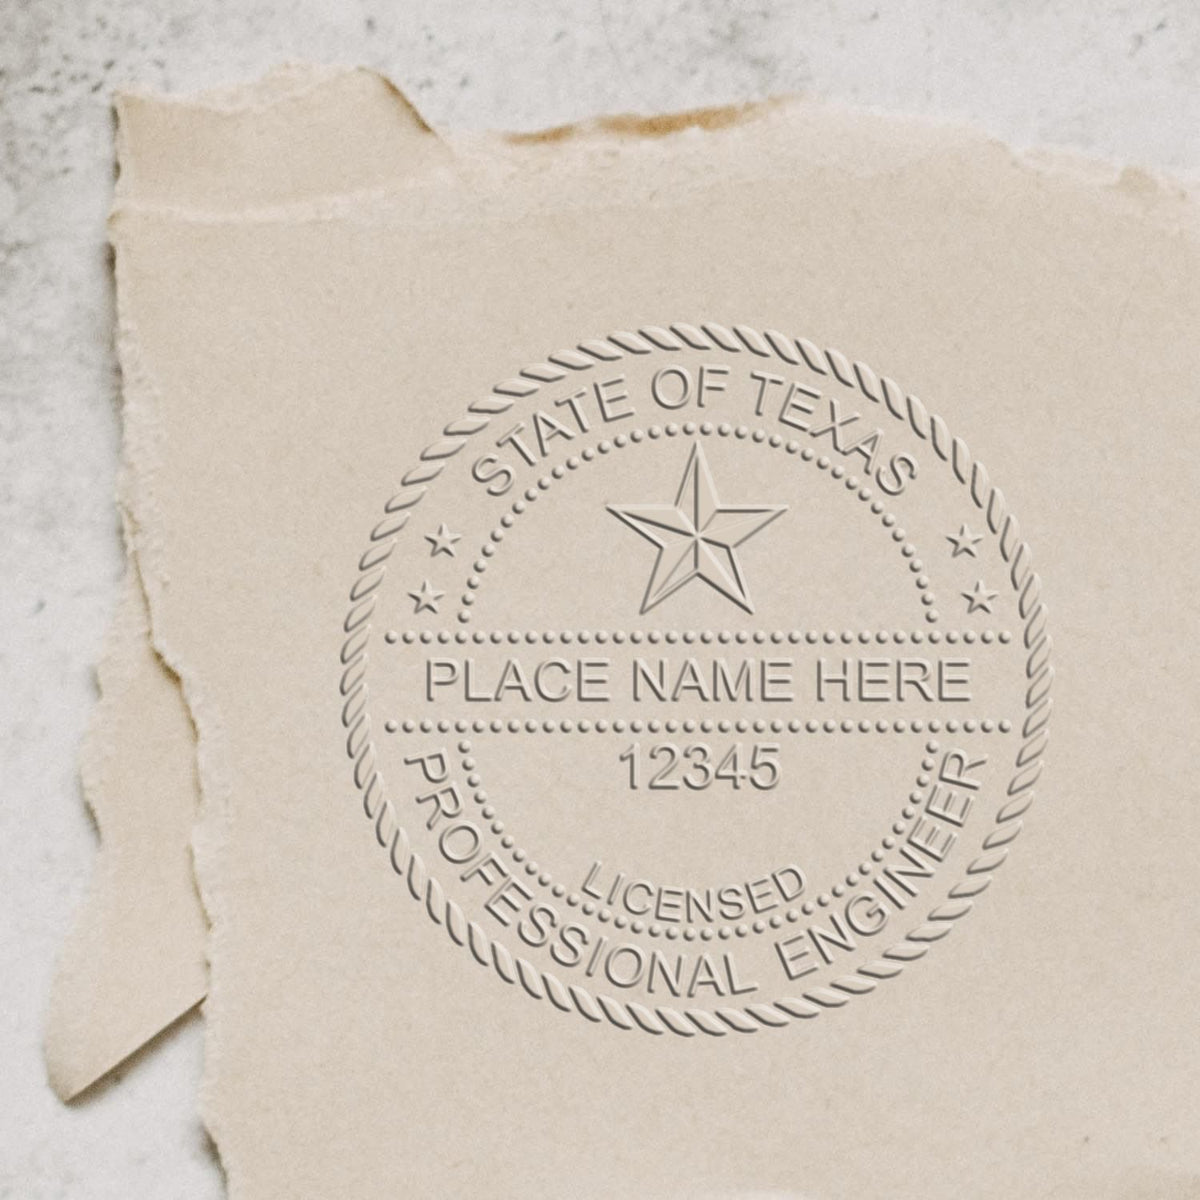 The State of Texas Extended Long Reach Engineer Seal stamp impression comes to life with a crisp, detailed photo on paper - showcasing true professional quality.